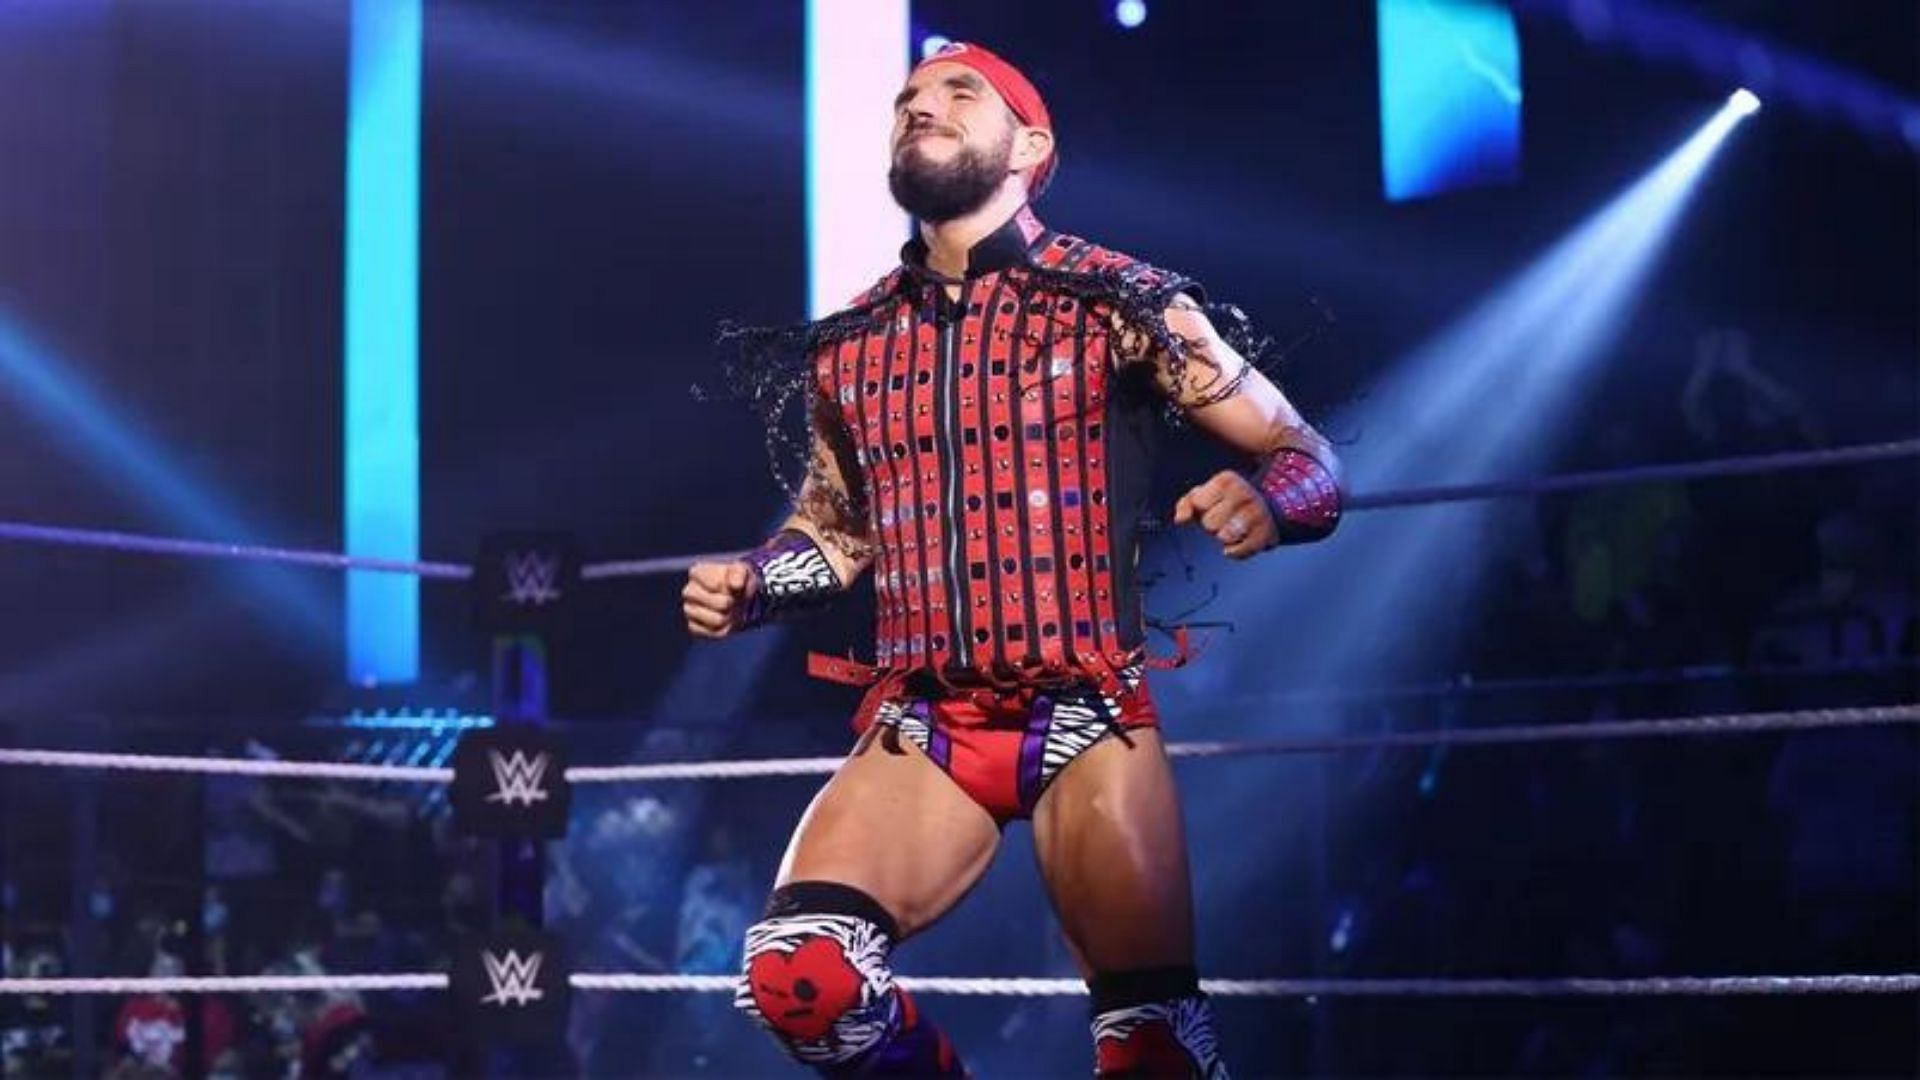 Johnny Gargano at an NXT event in 2021!